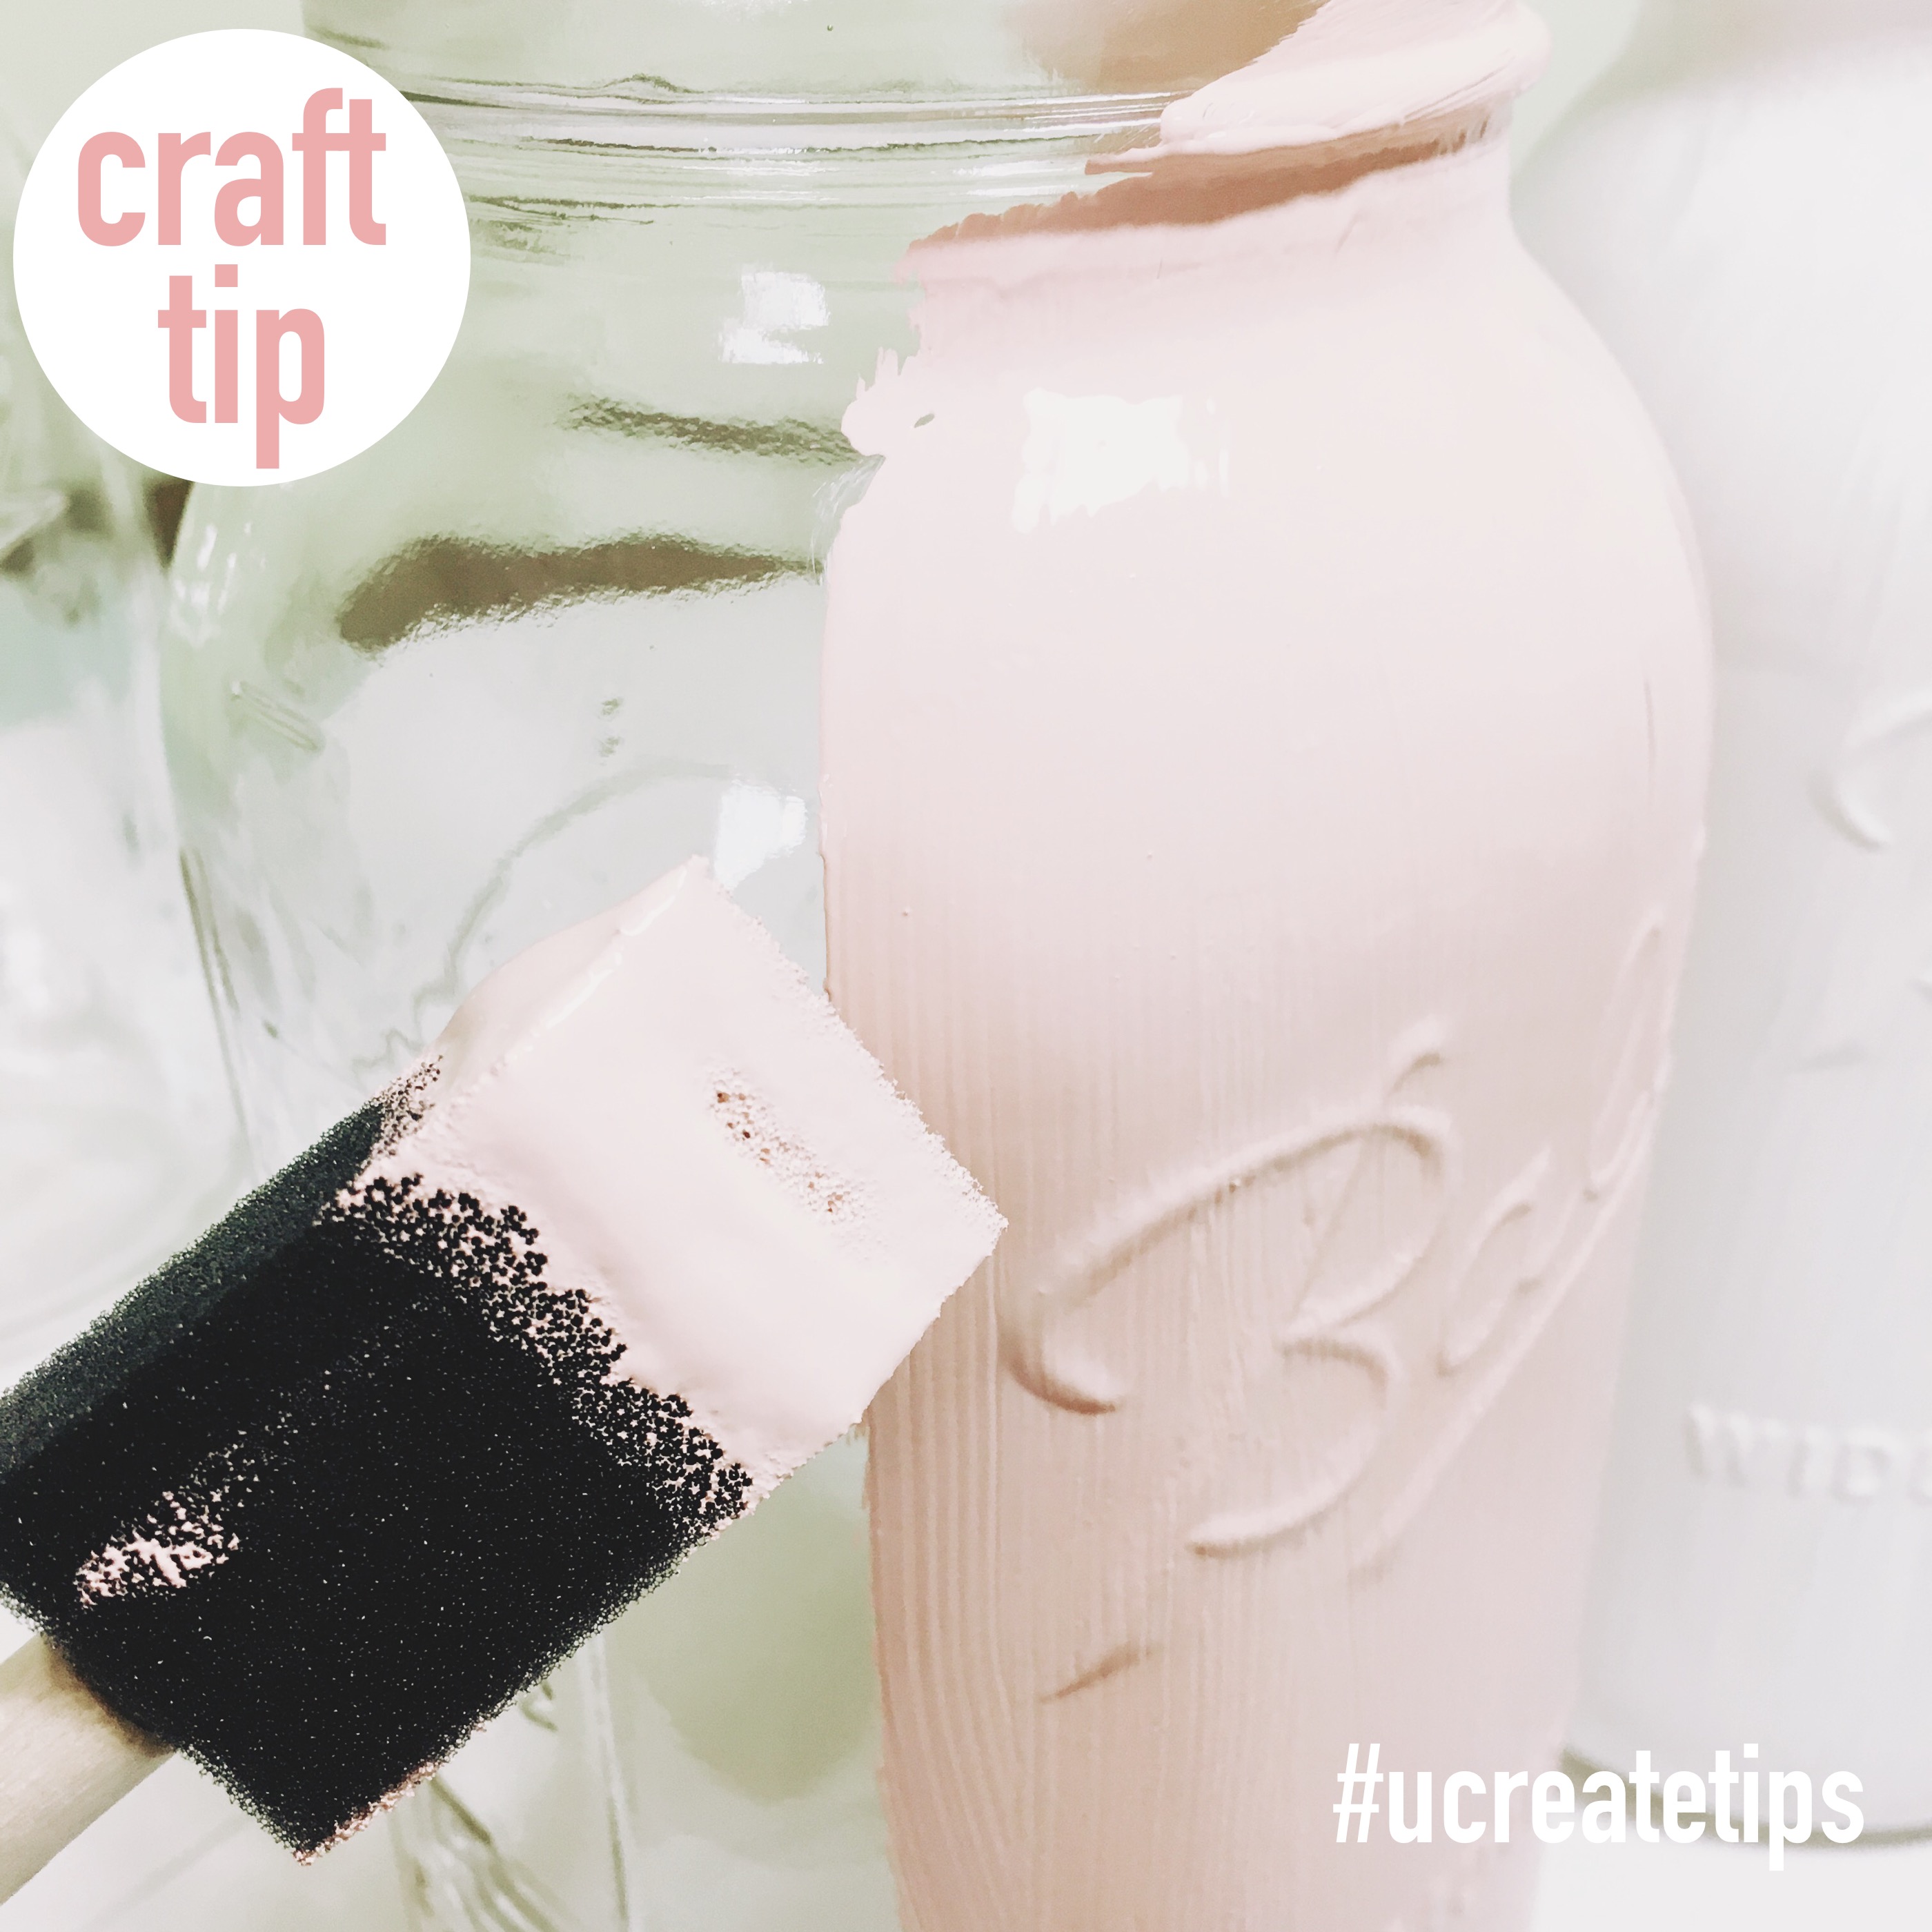 Craft Tip: Paint glass or porcelain with chalk paint. No priming necessary!